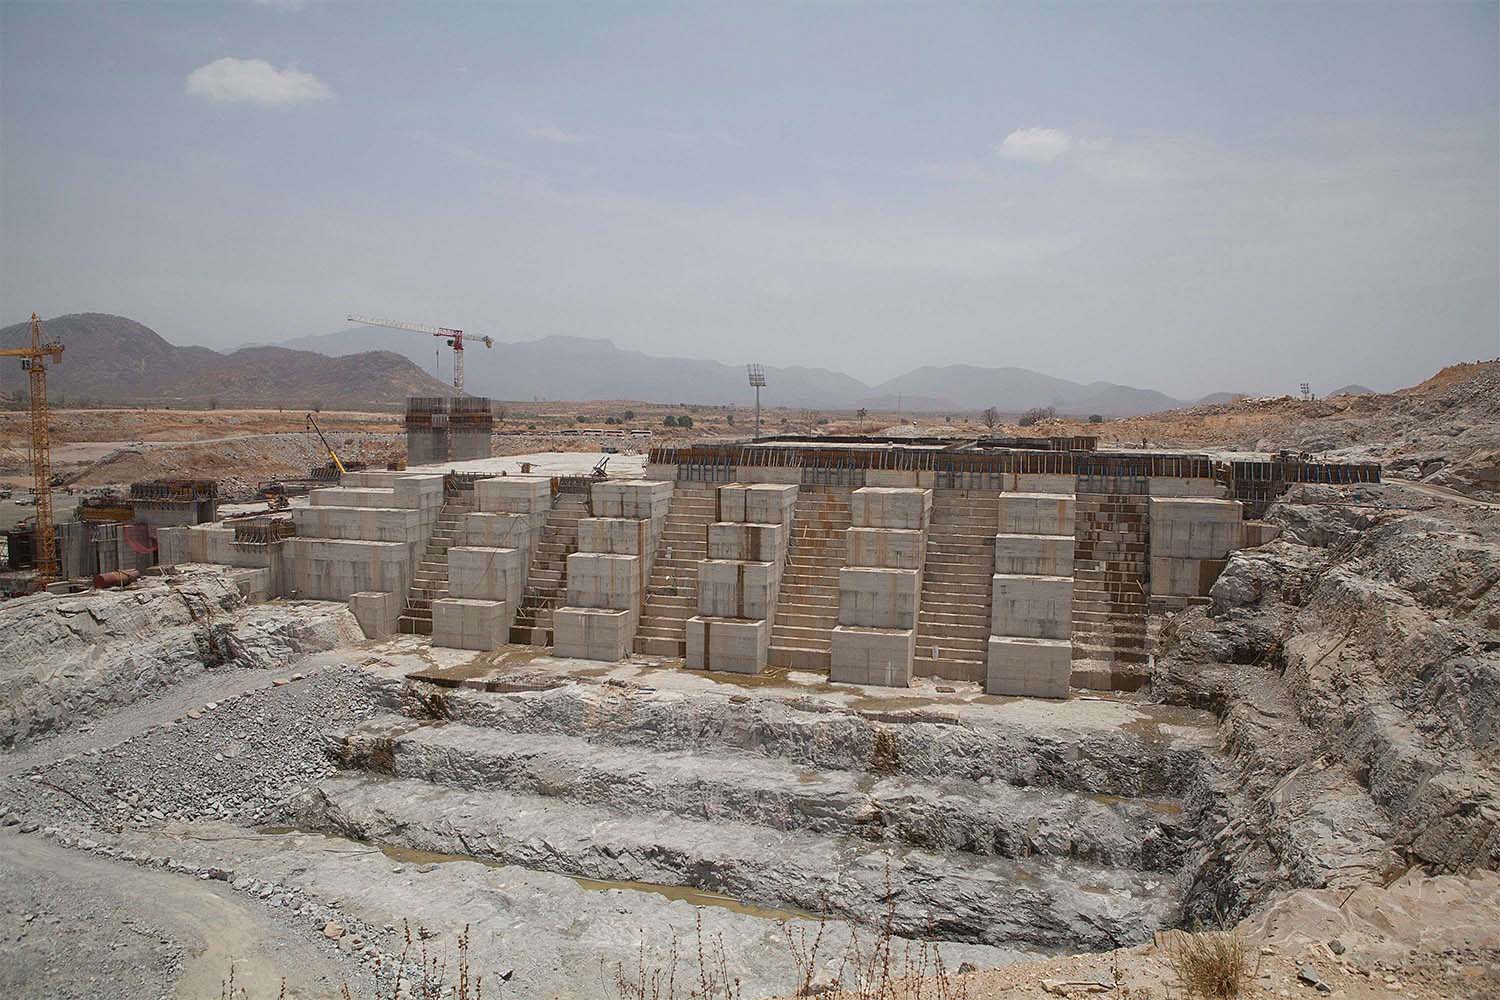 General view of the construction works at the Grand Ethiopian Renaissance Dam near Guba in Ethiopia